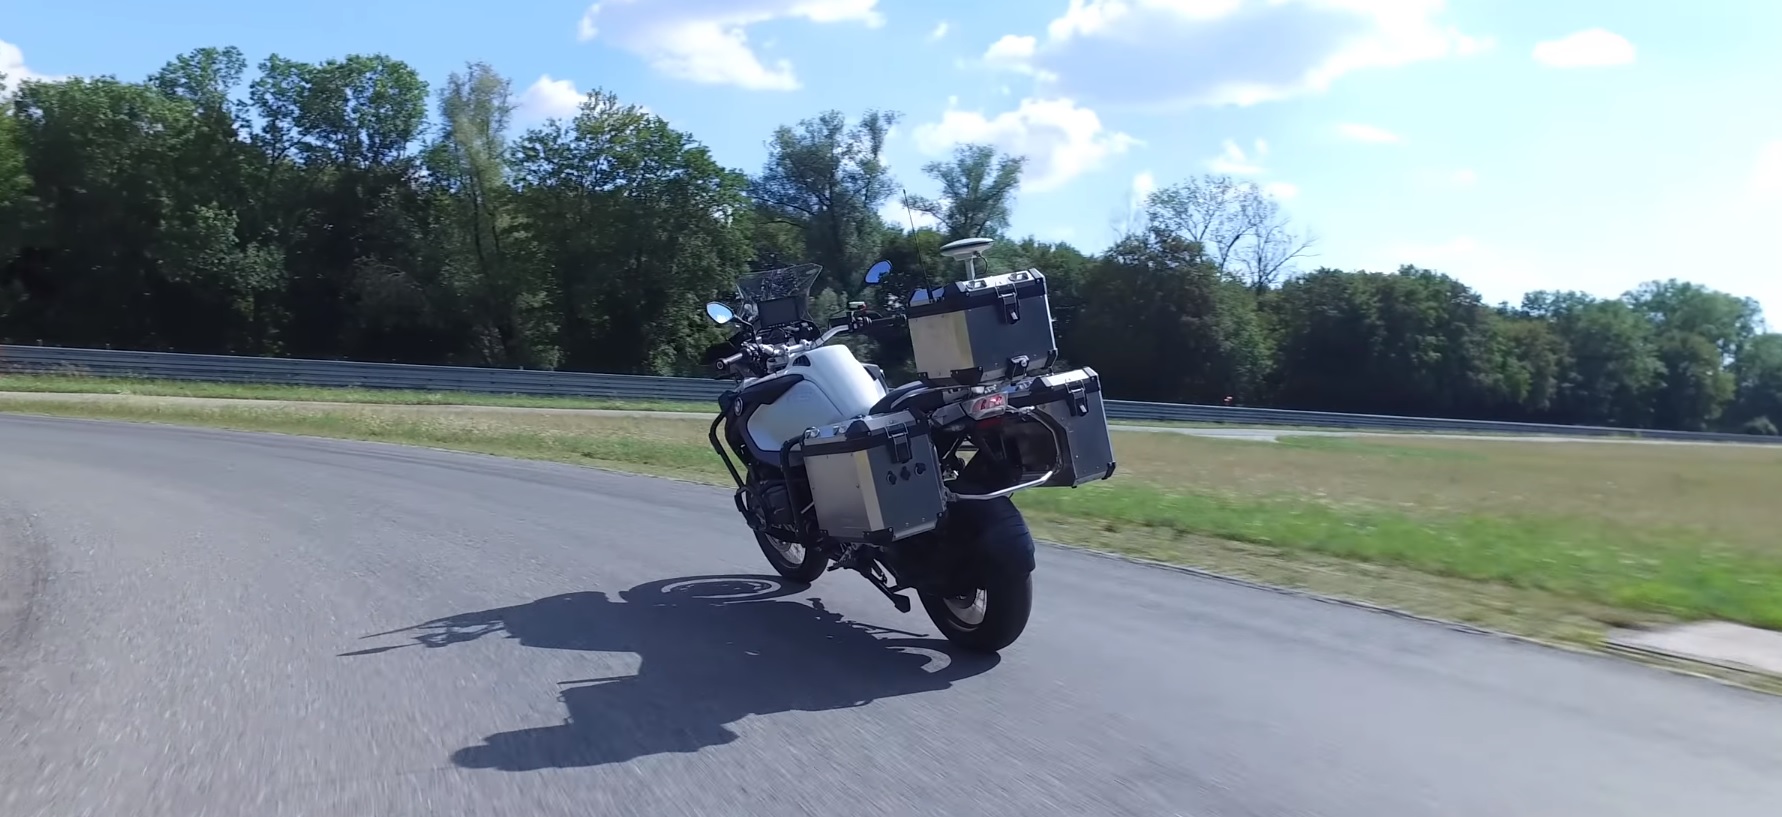 BMW have created an unmanned motorcycle to test new security systems